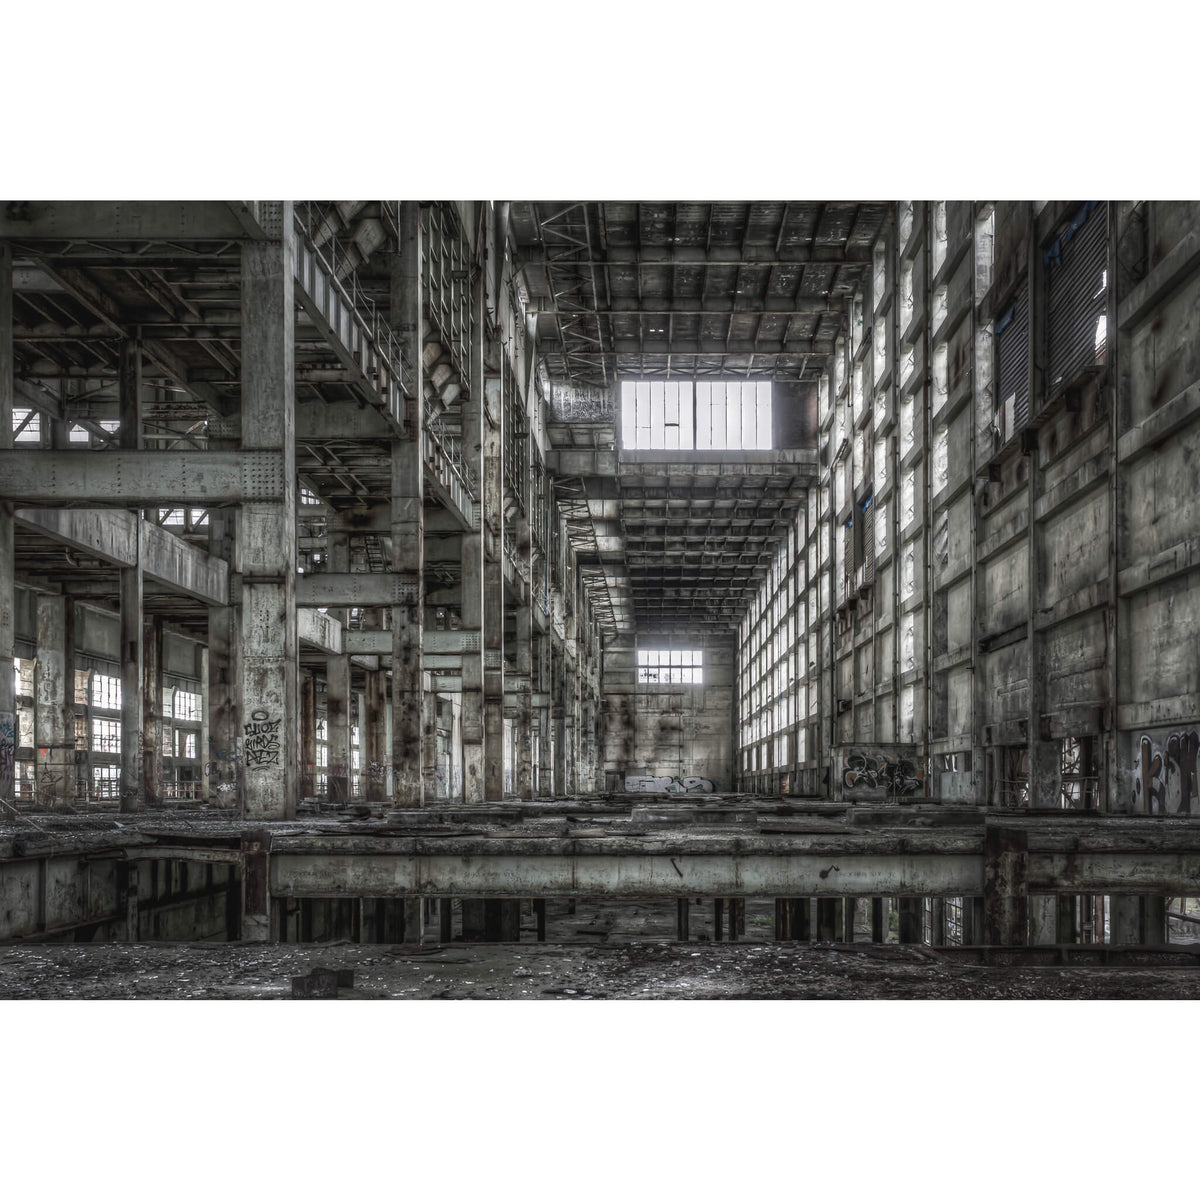 Boiler House B Station Looking Towards A | Wangi Power Station Fine Art Print - Lost Collective Shop